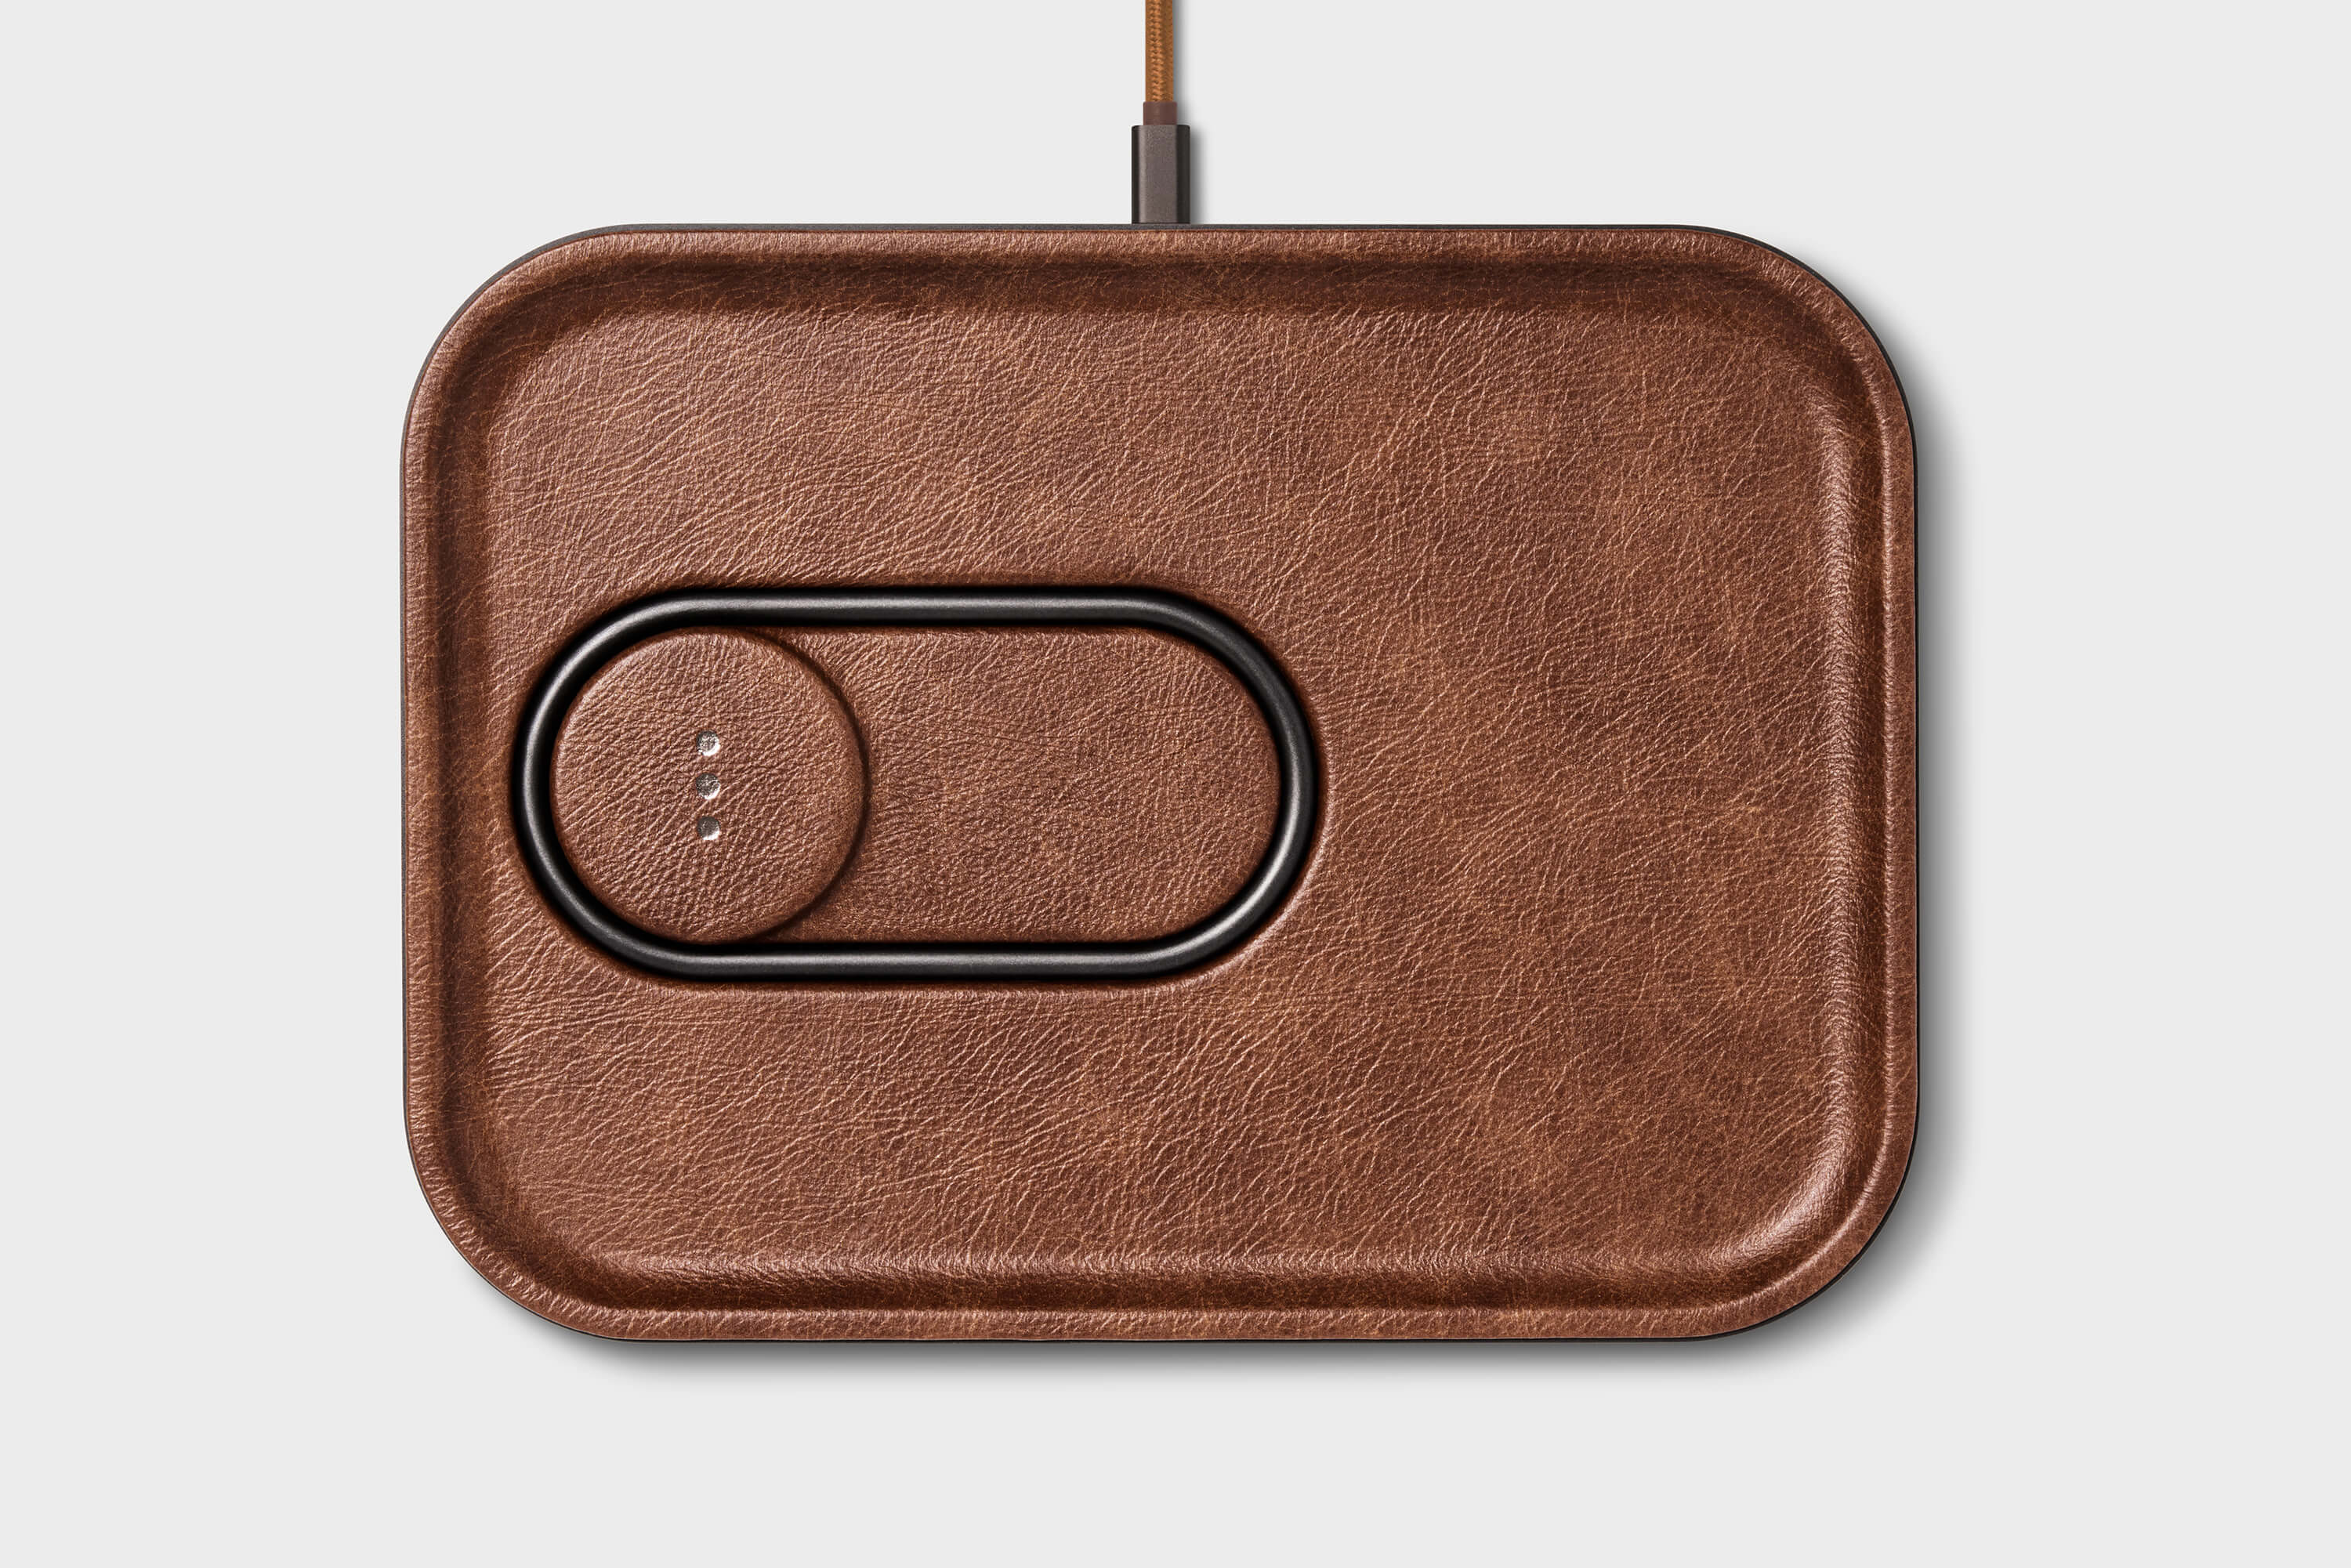 Courant Mag 3: Classics Dual Device Charging Tray - Saddle